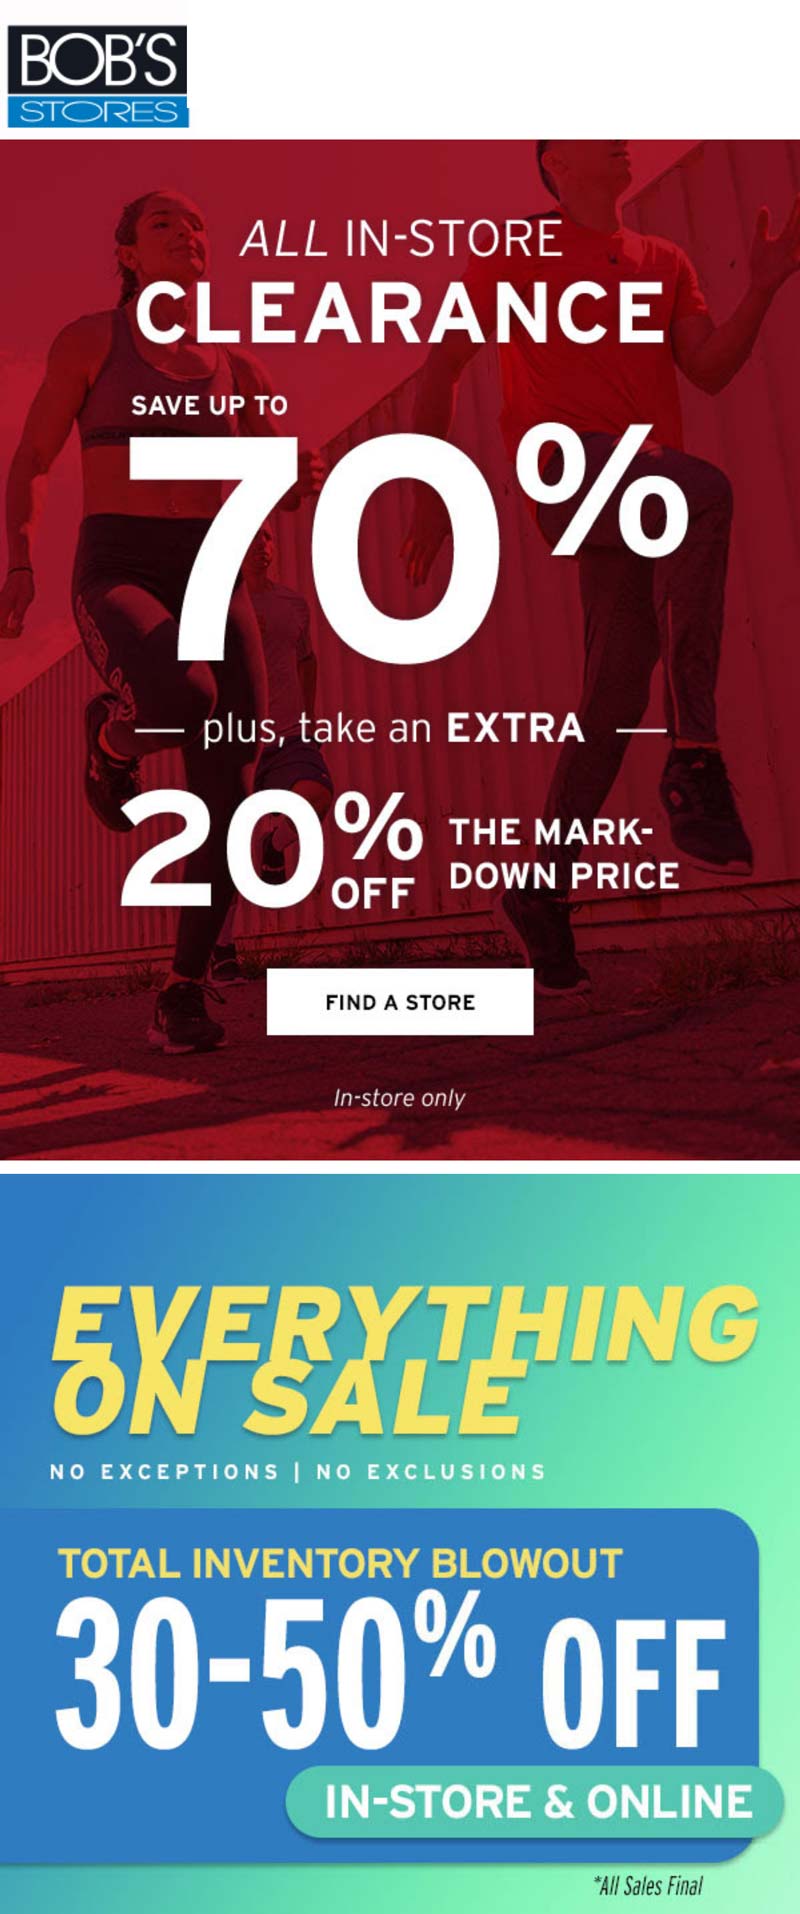 Bobs Stores stores Coupon  Everything 30-50% off at Bobs Stores #bobsstores 